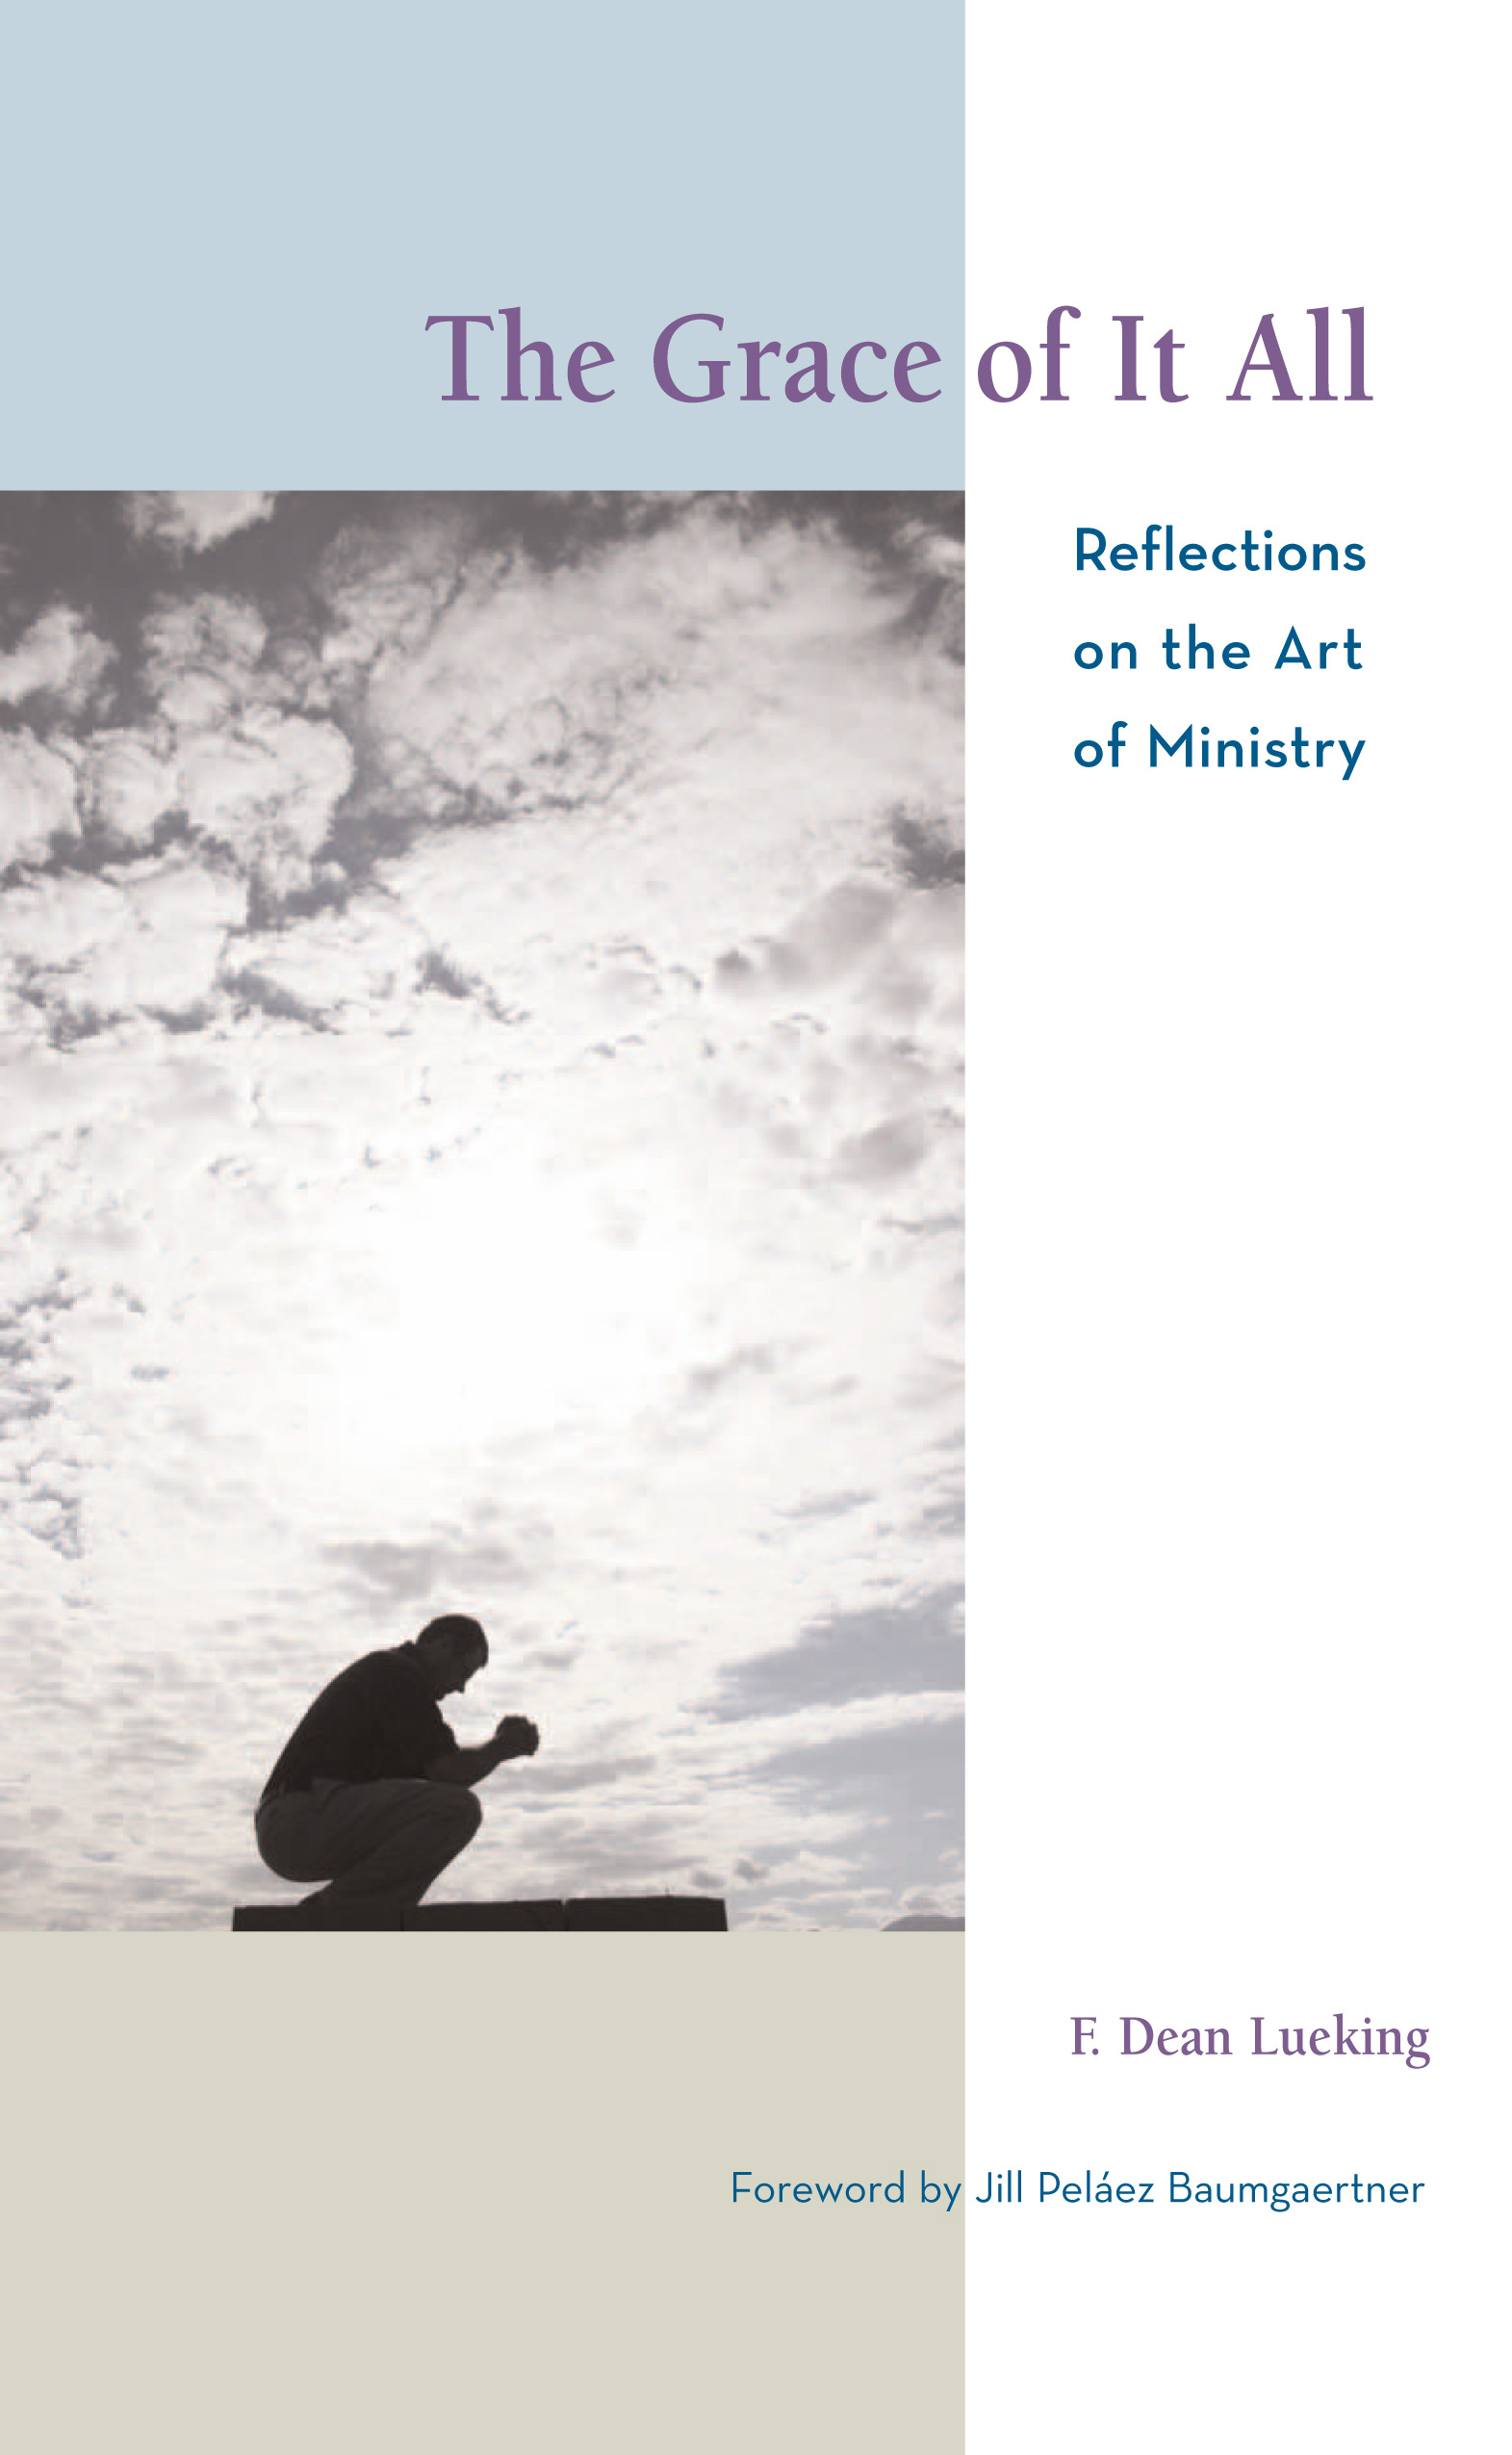 The Grace of It All: Reflections on the Art of Ministry